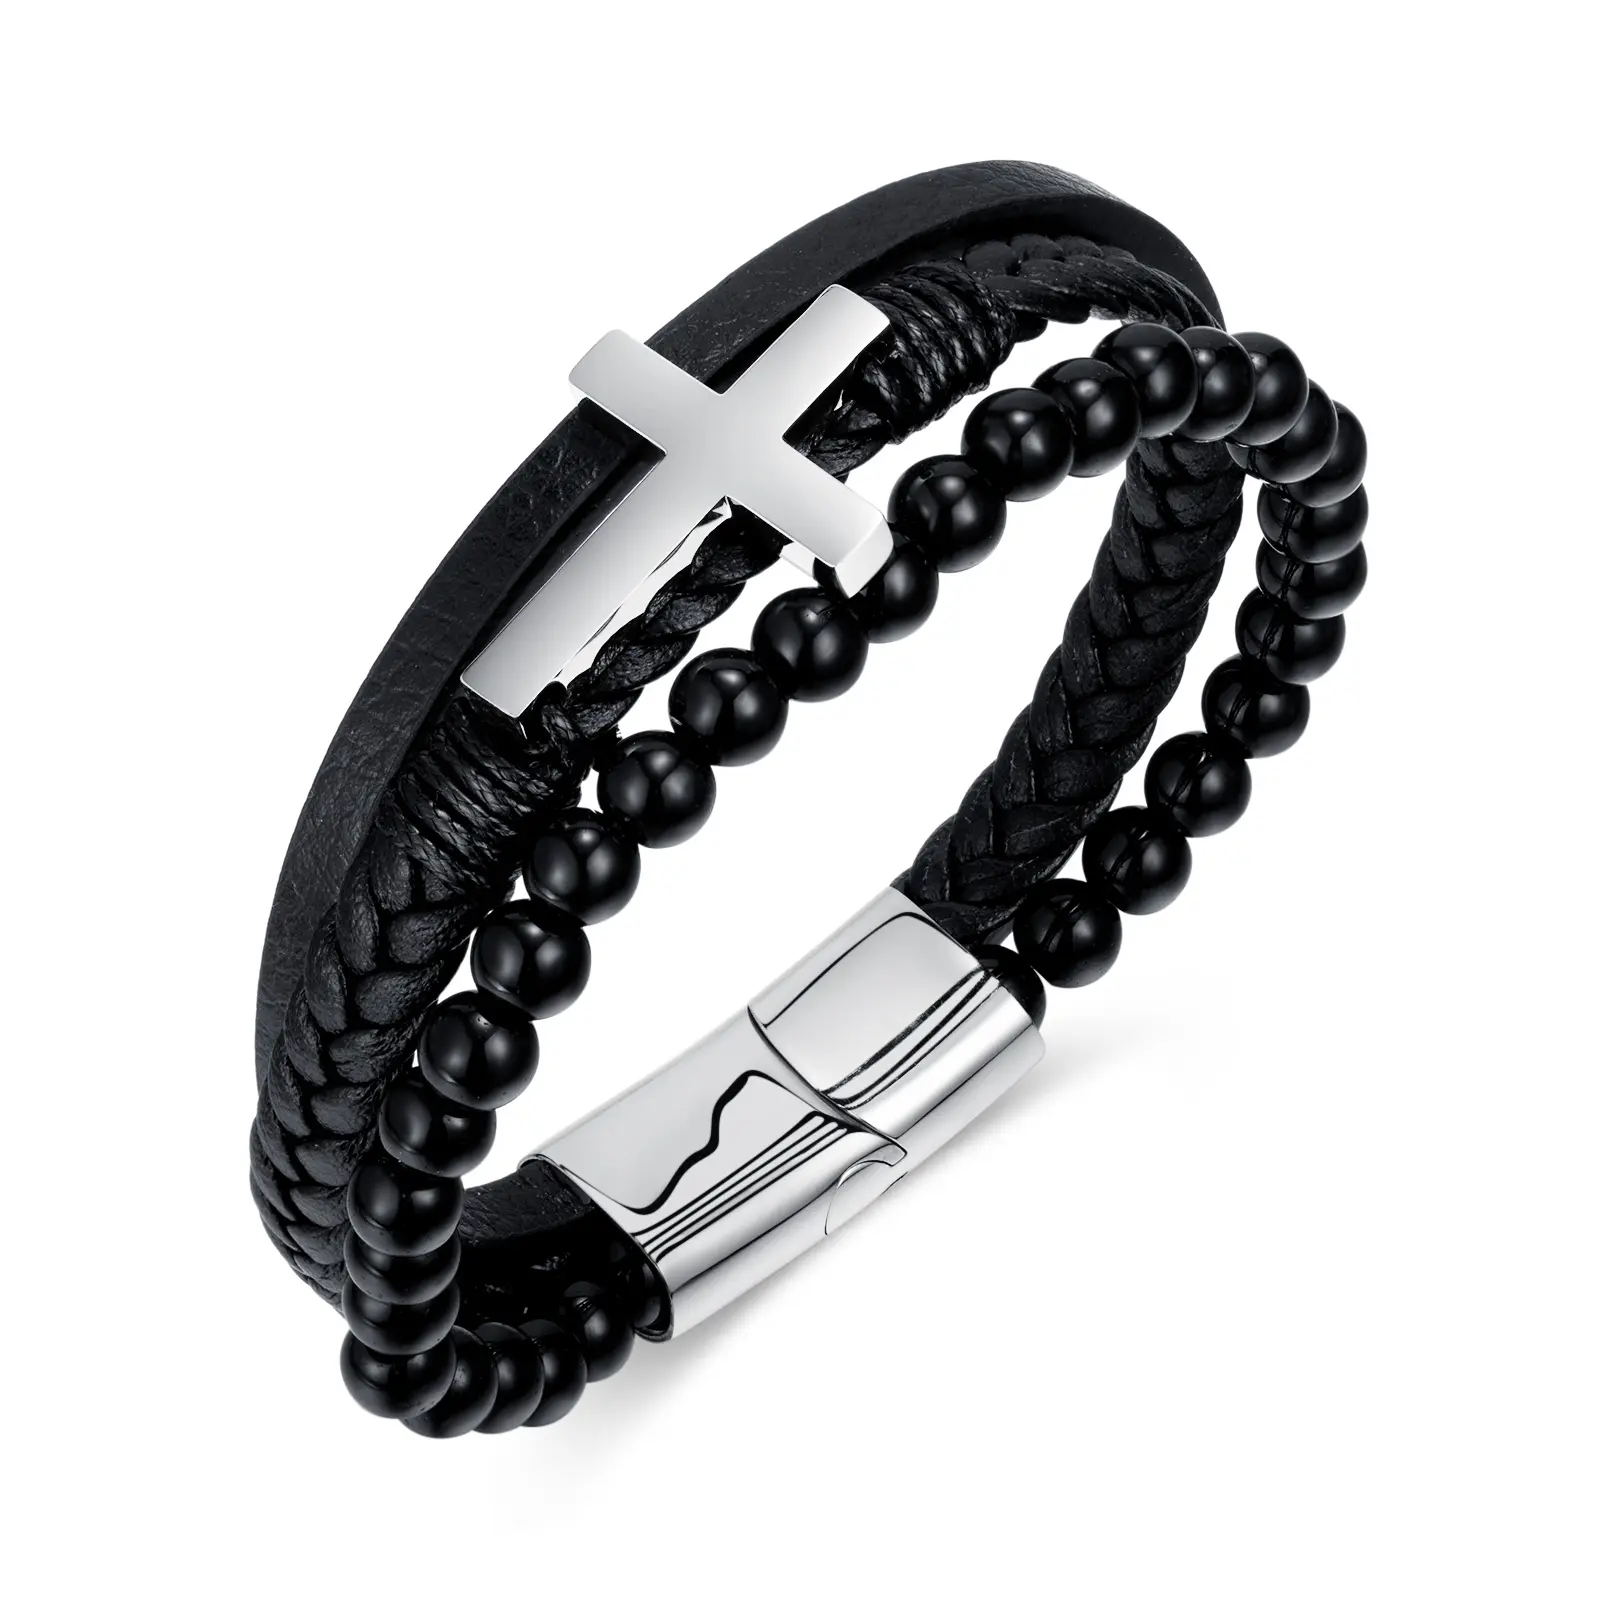 Hot selling new arrived crucHot selling neifix religion men's bracelet jewelry high quality cowhide leather Punk style wristband